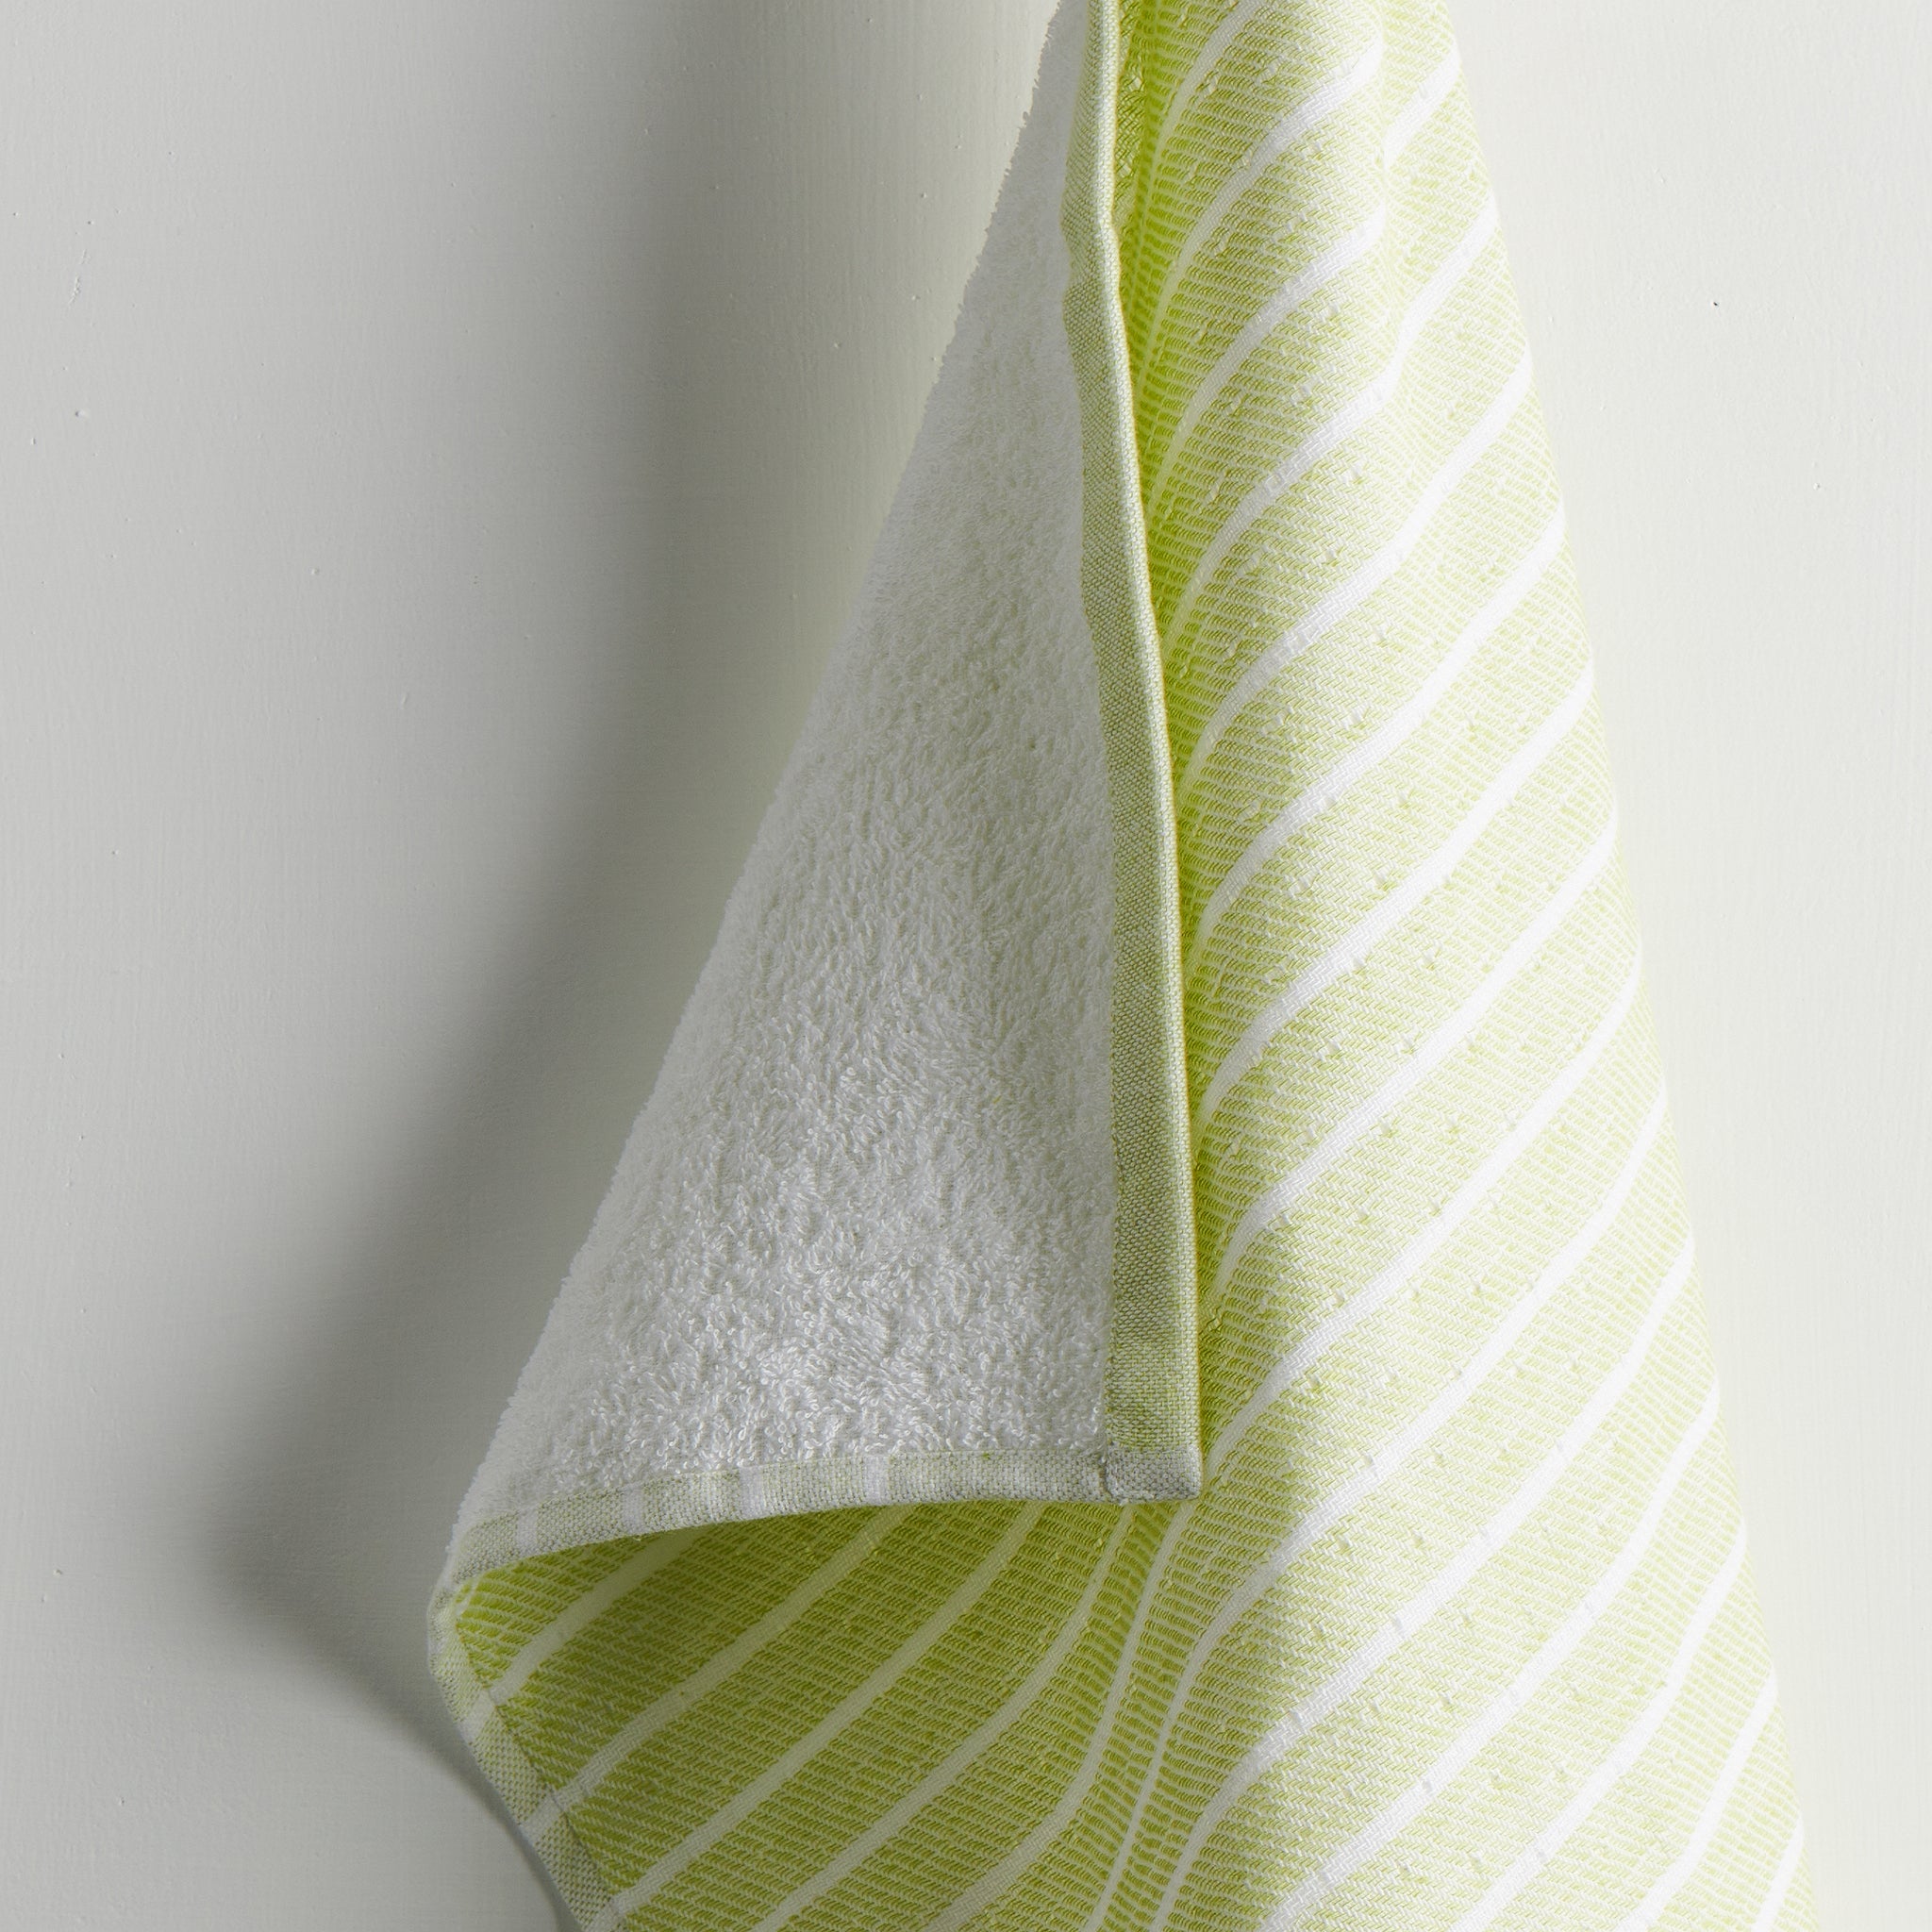 Square Terry Hand Towel - Olive Oil & Marseille Soap - Cream